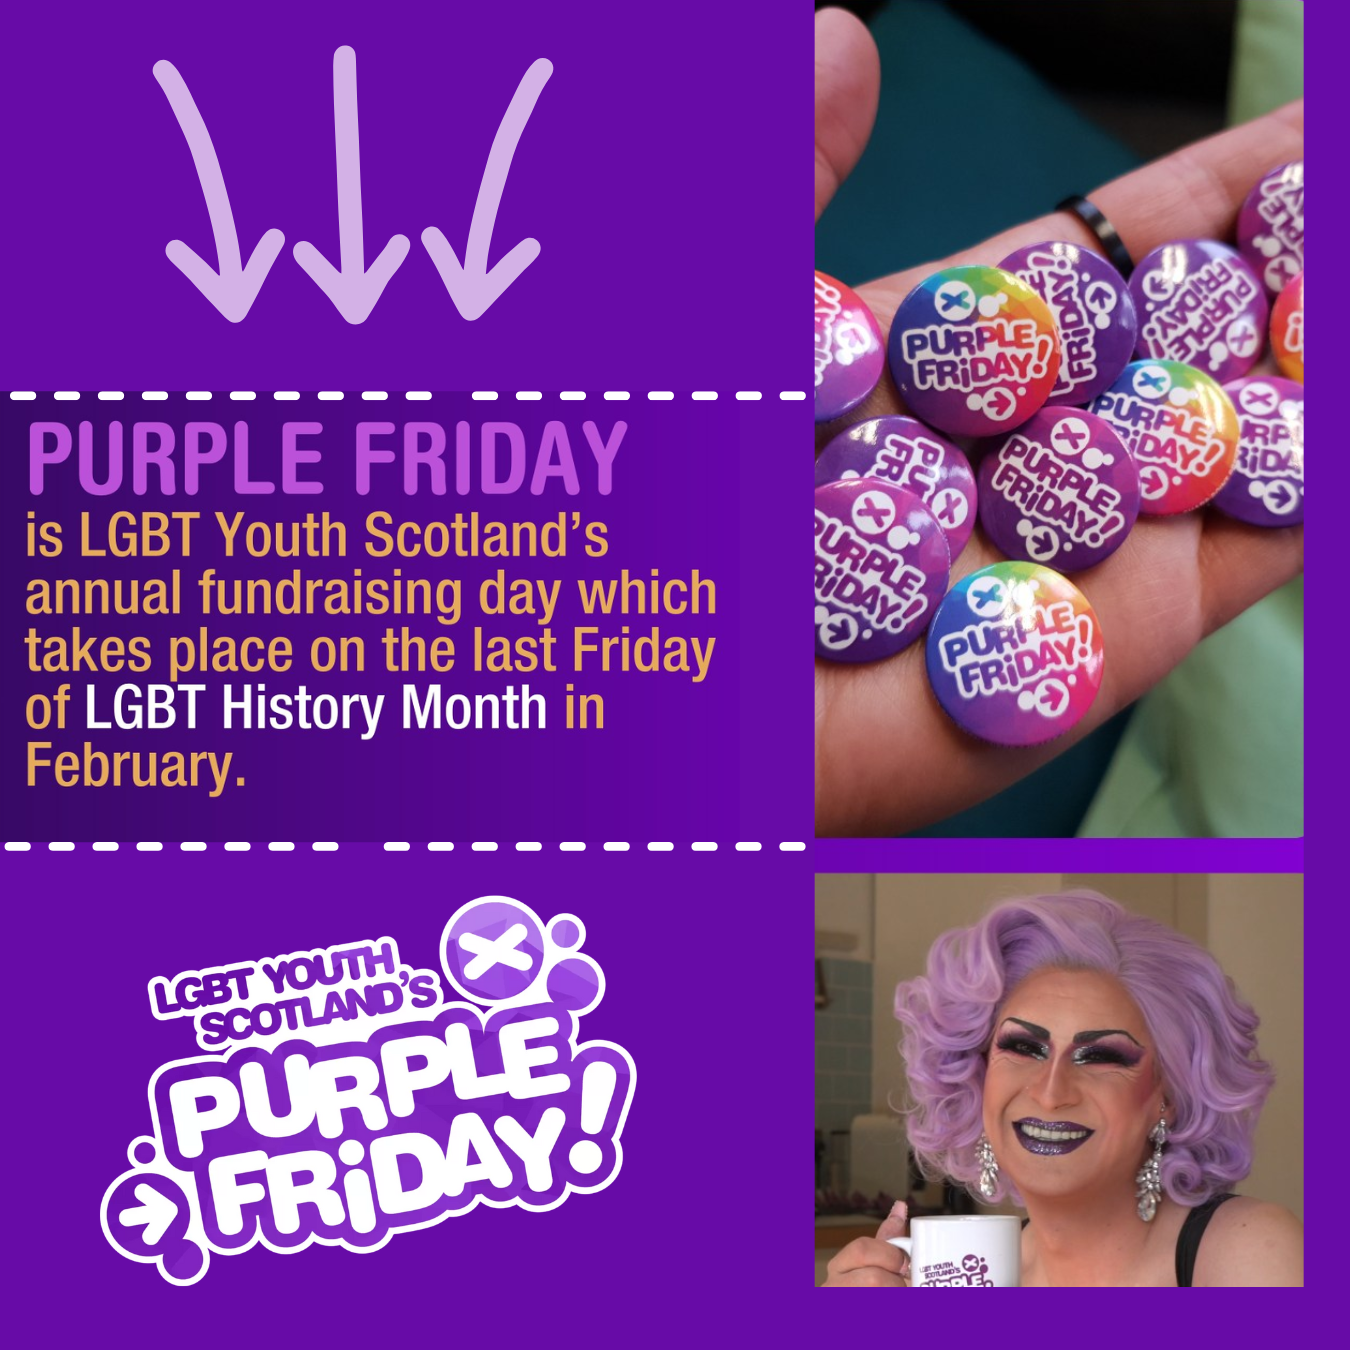 Decorative image promoting LGBT Youth Scotland's Purple Friday campaign